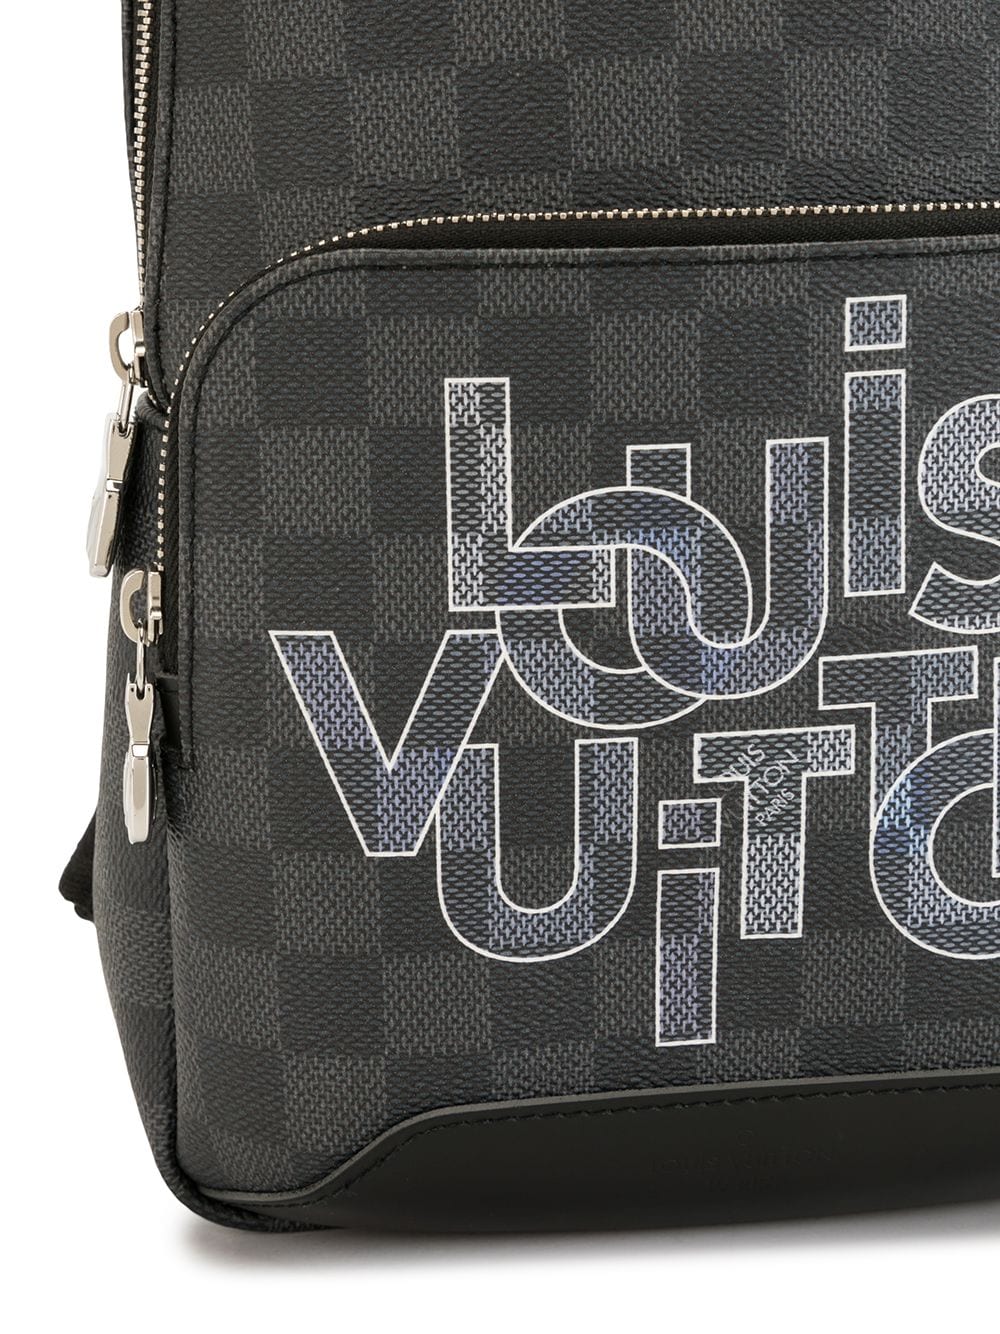 louie vuitton book bag - clothing & accessories - by owner - apparel sale -  craigslist